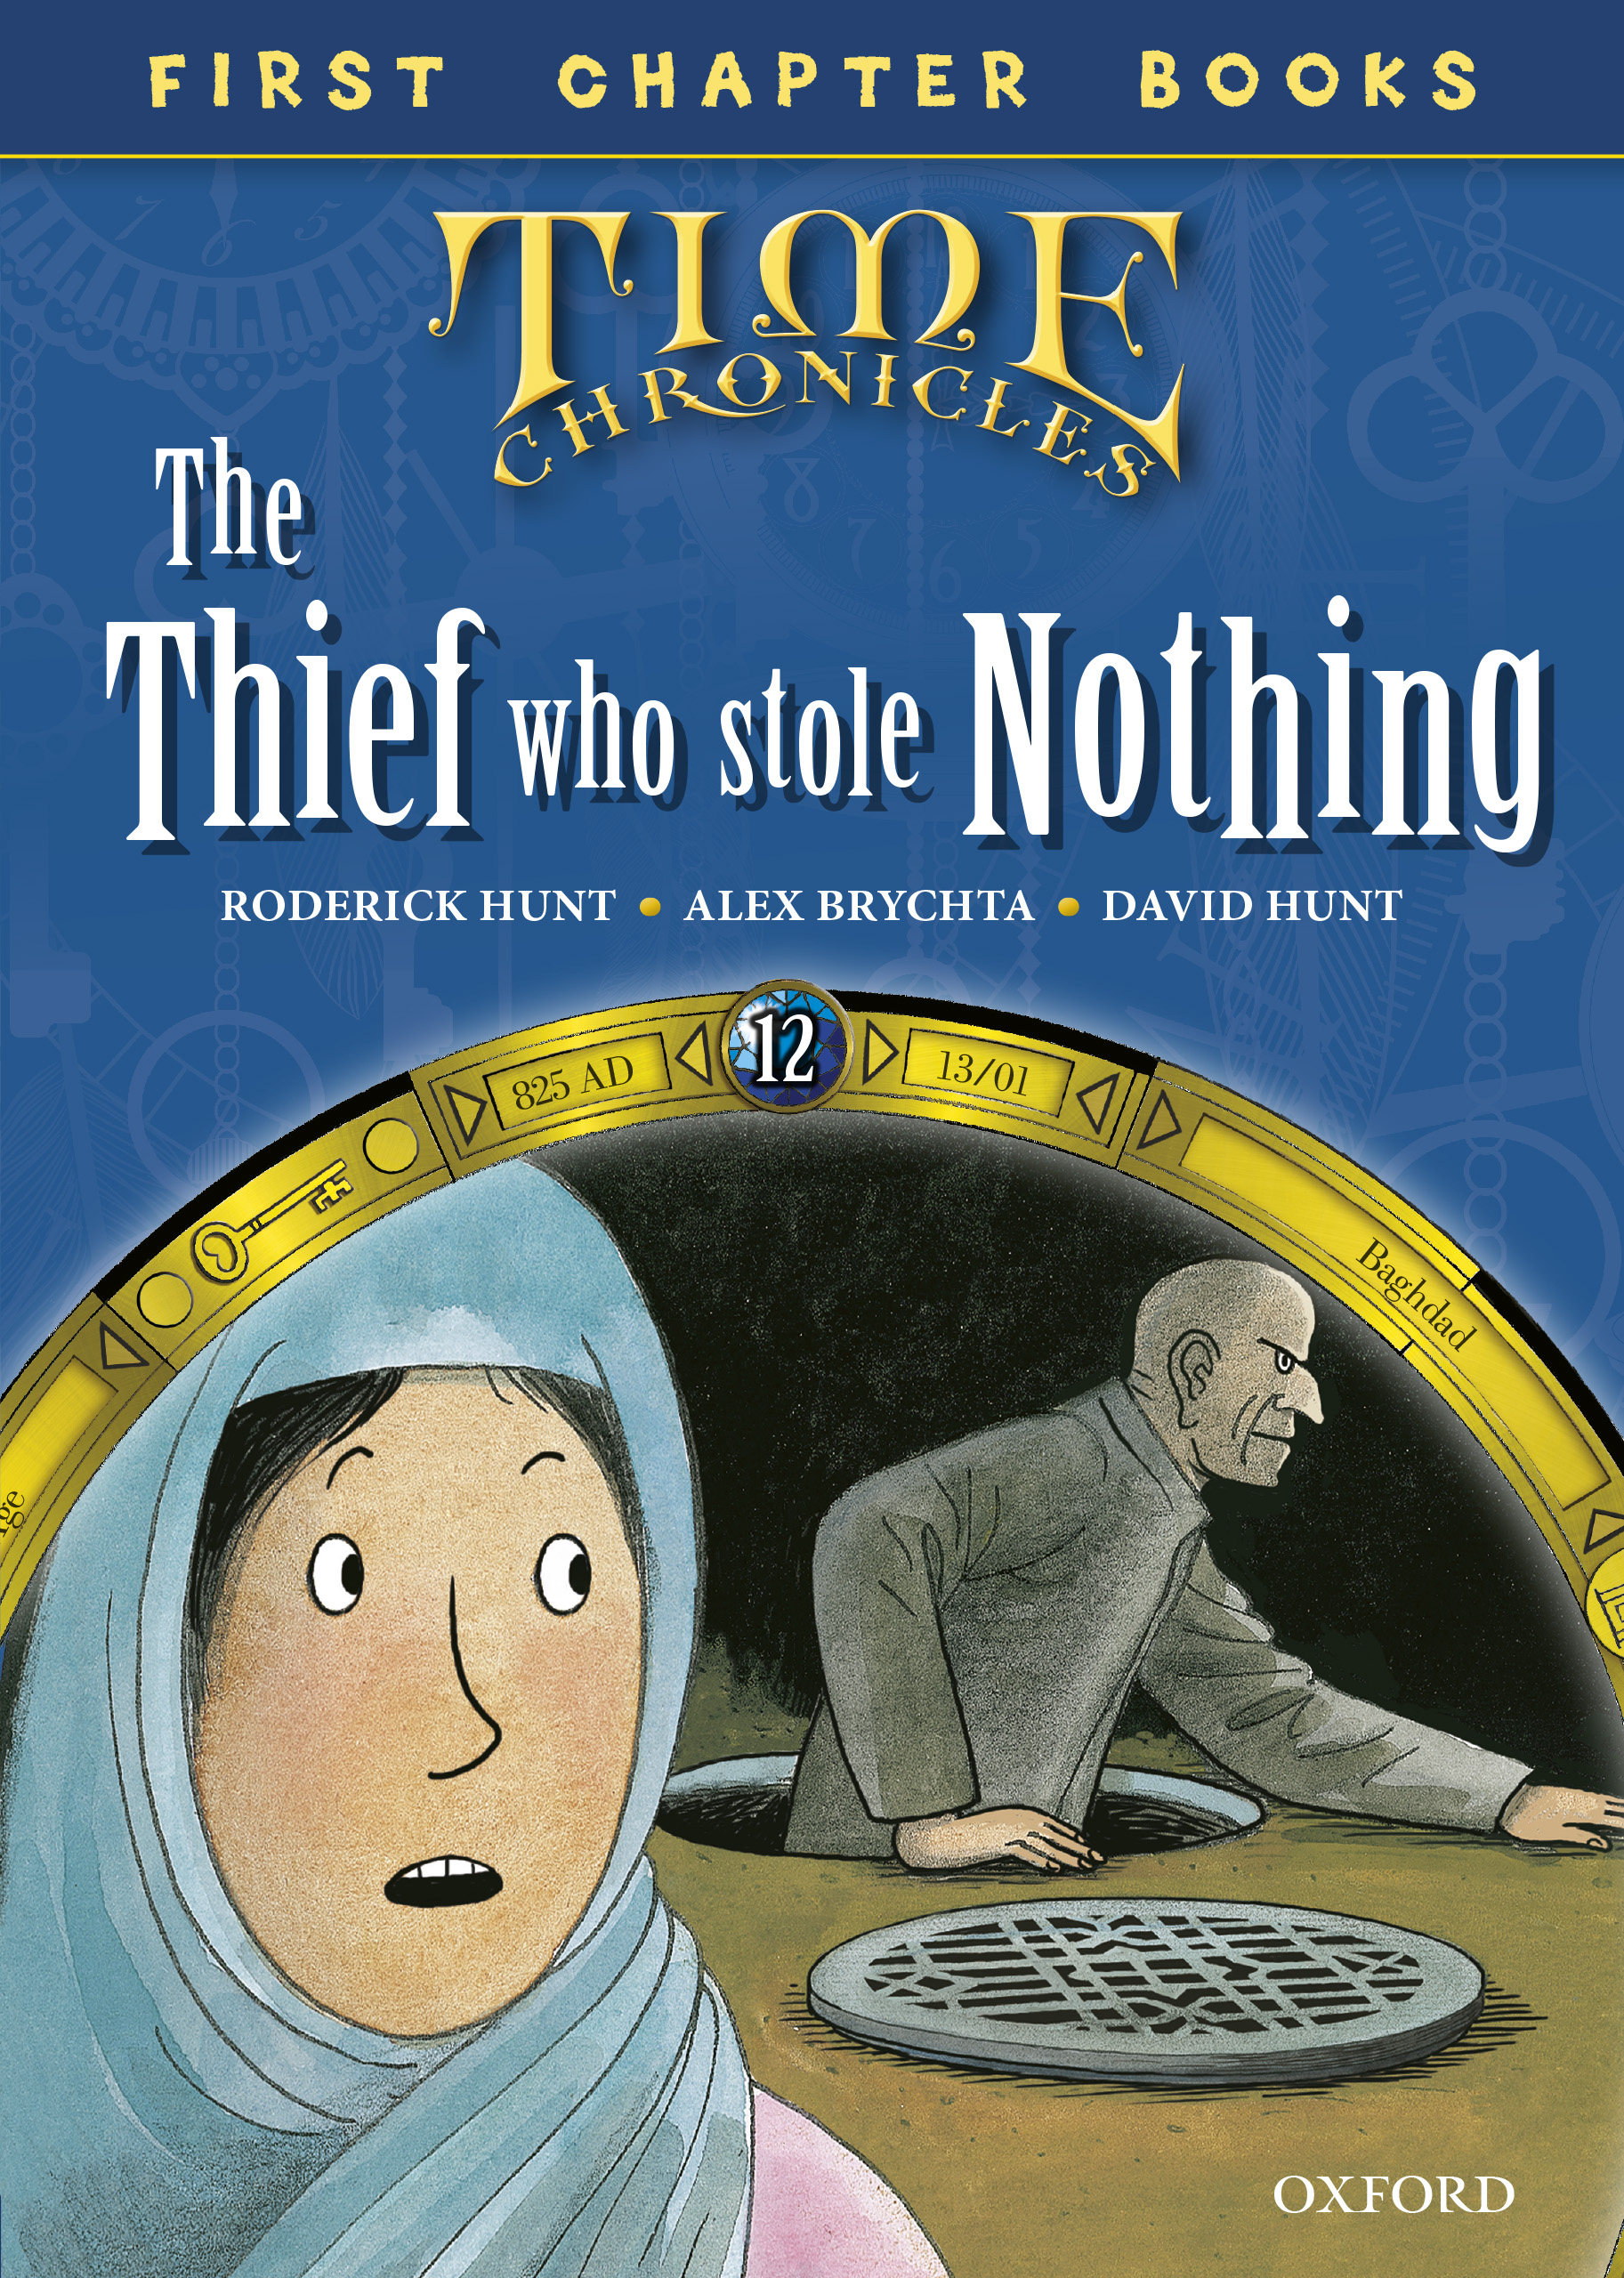 Read with Biff, Chip and Kipper Time Chronicles: First Chapter Books: The Thief Who Stole Nothing